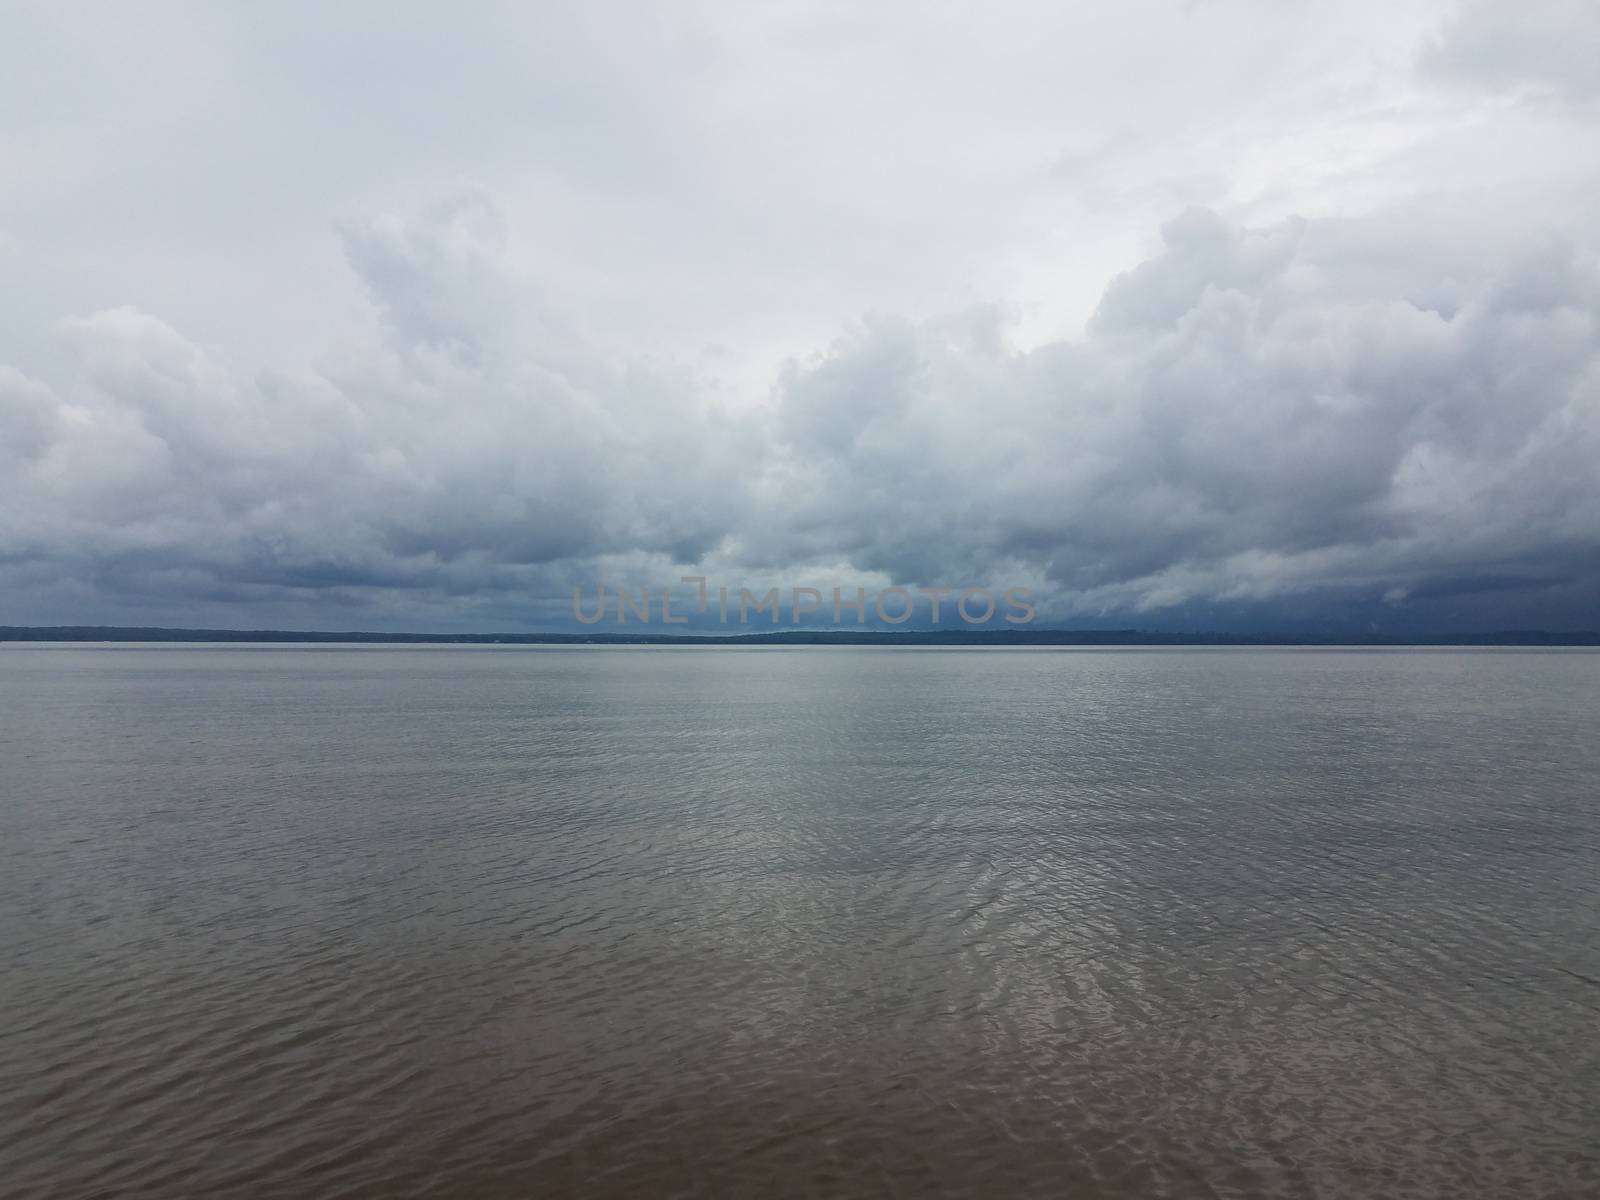 rain clouds forming over calm river near shore by stockphotofan1